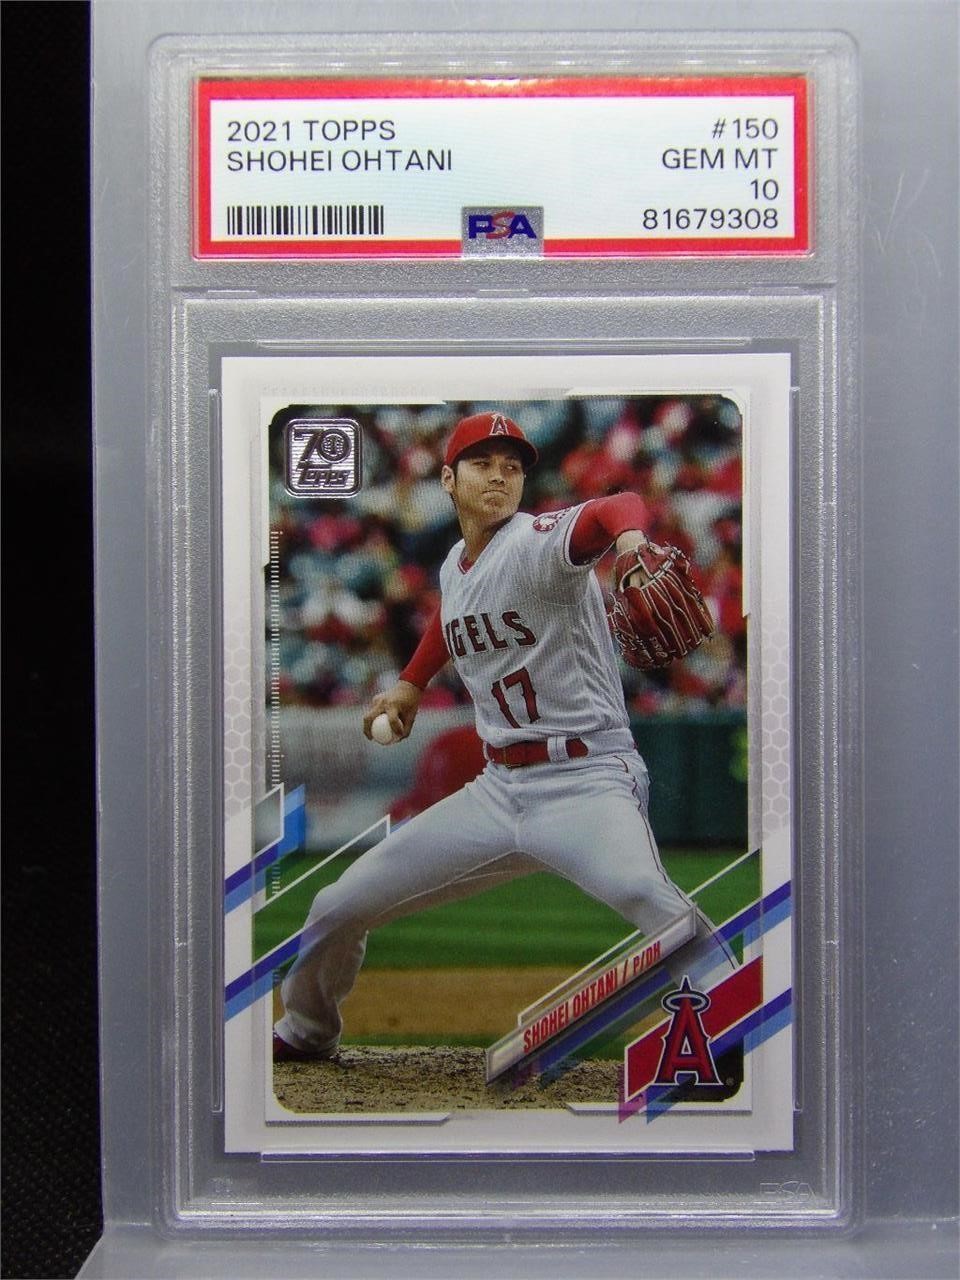 Mostly Modern Sports Card Auction Ending June 16 7:00 CST